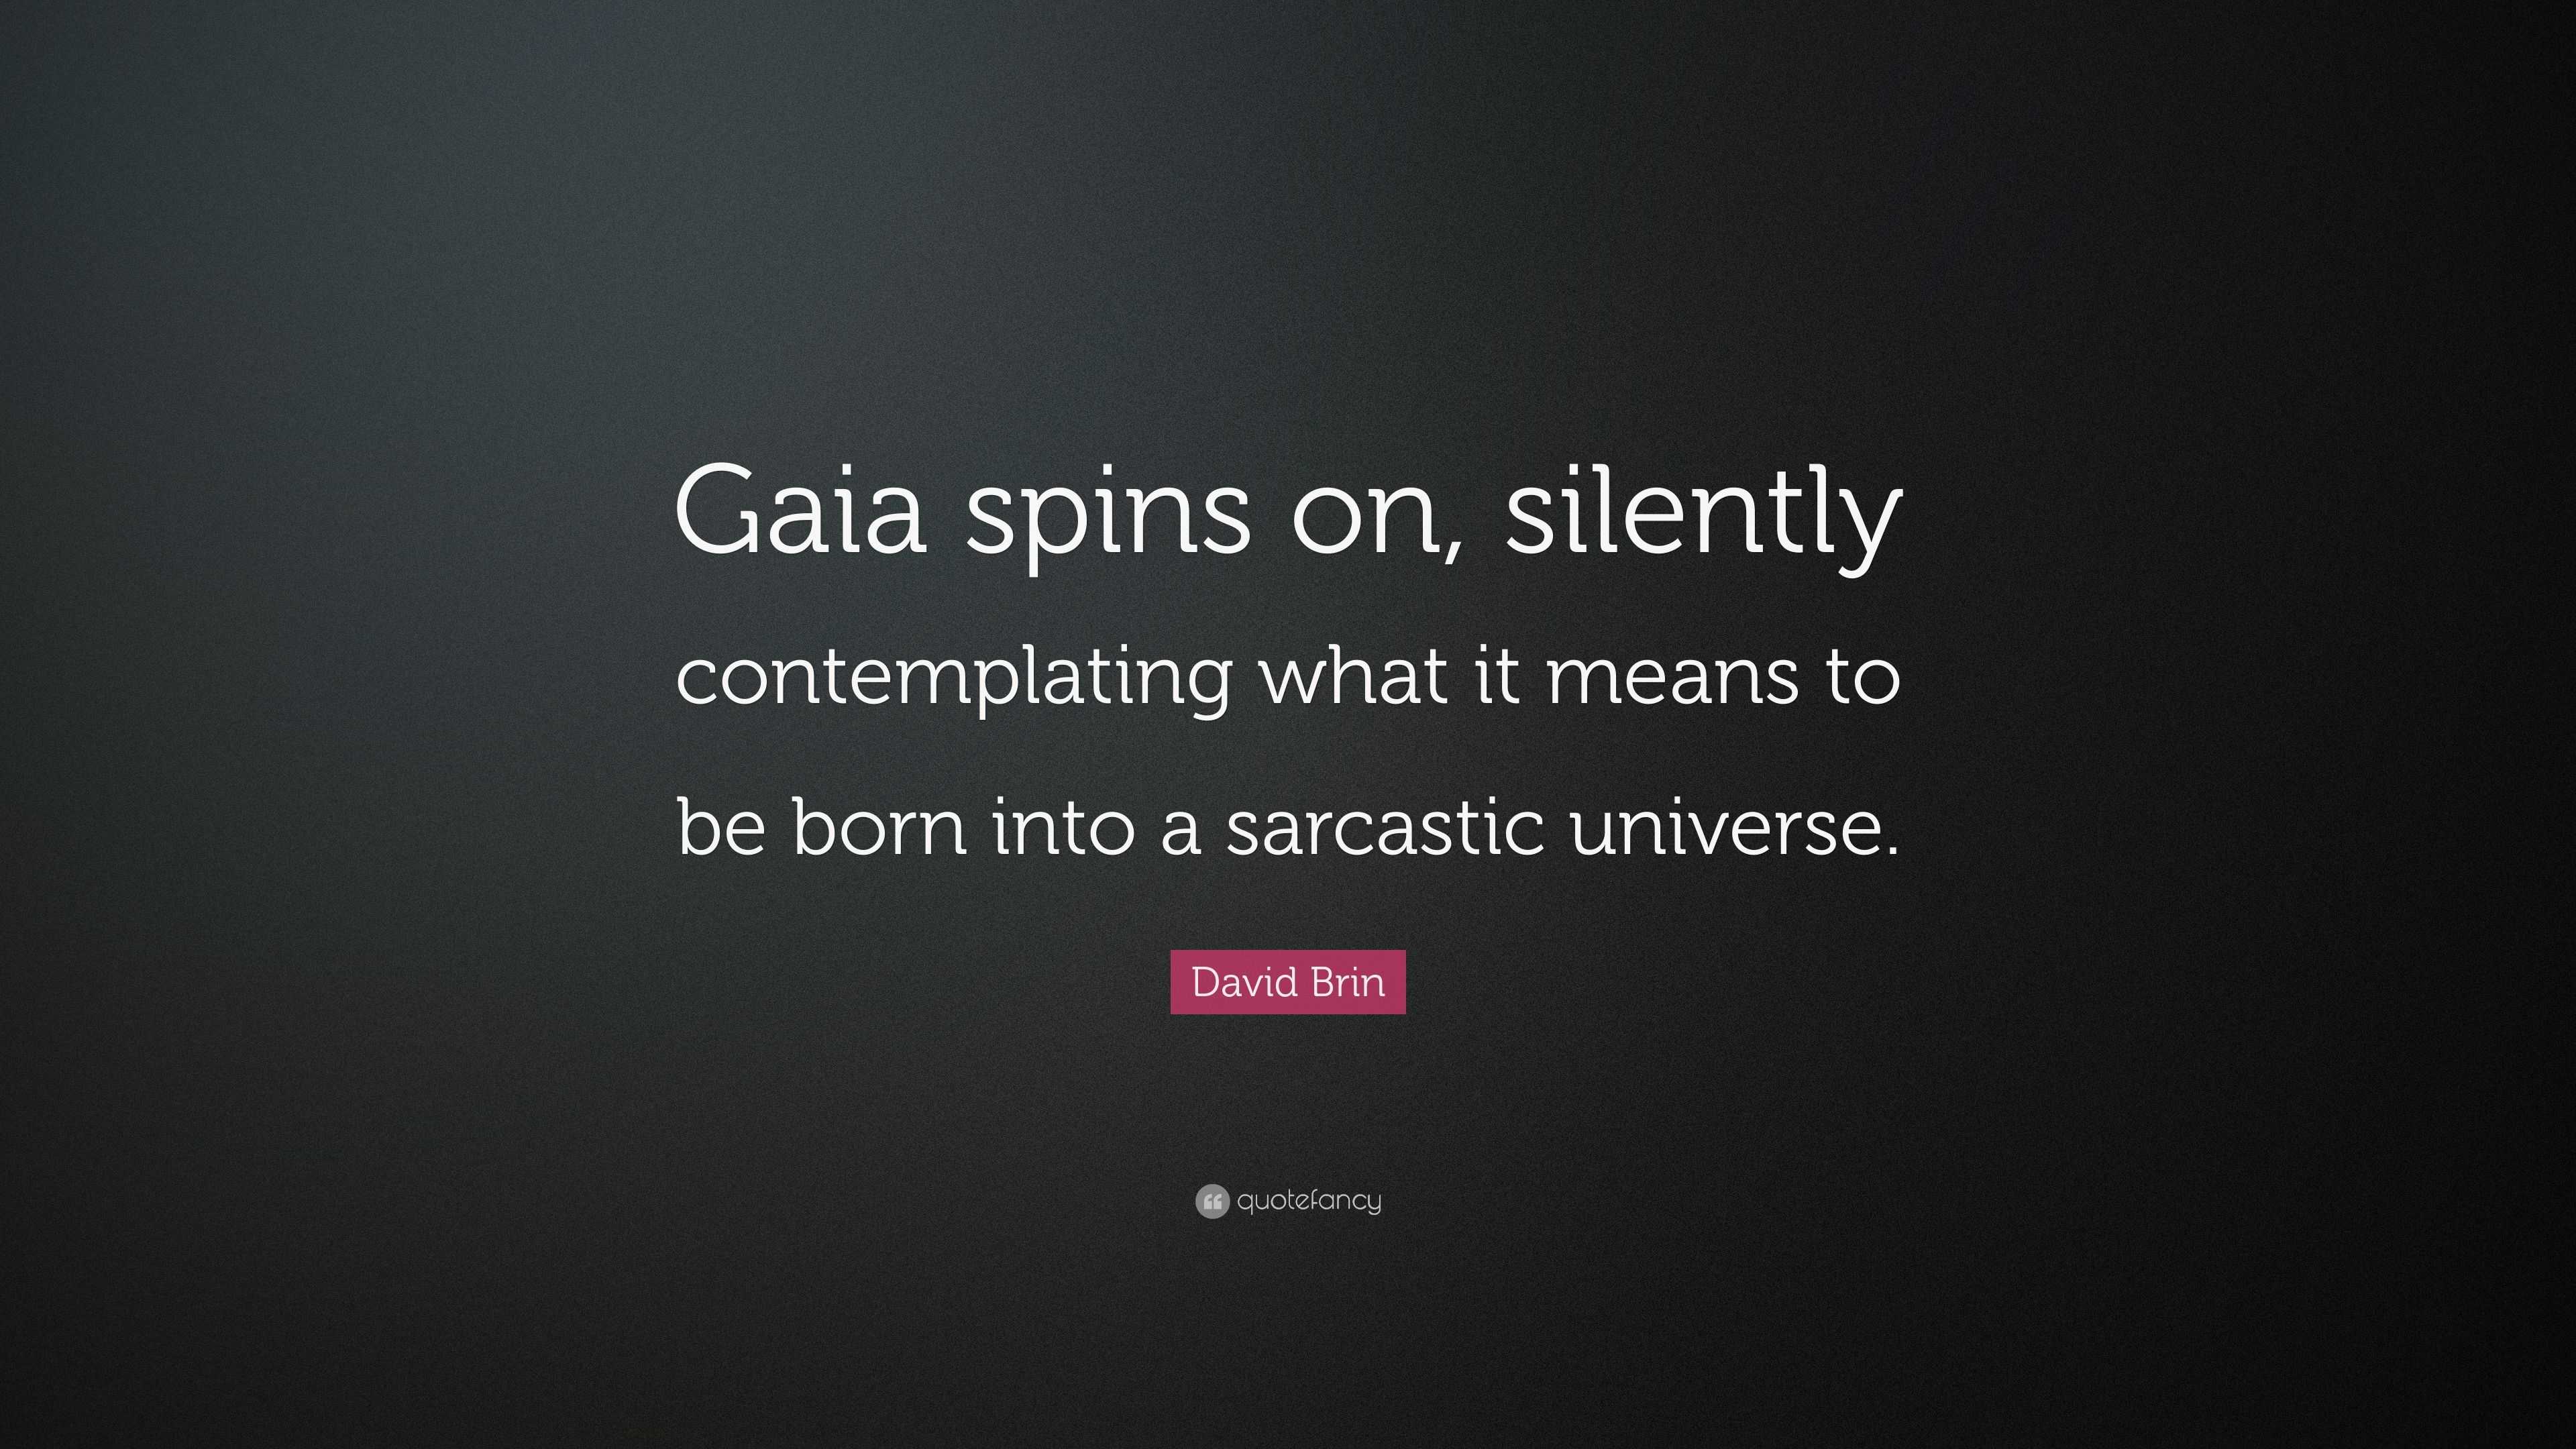 David Brin Quote: "Gaia spins on, silently contemplating what it means to be born into a ...